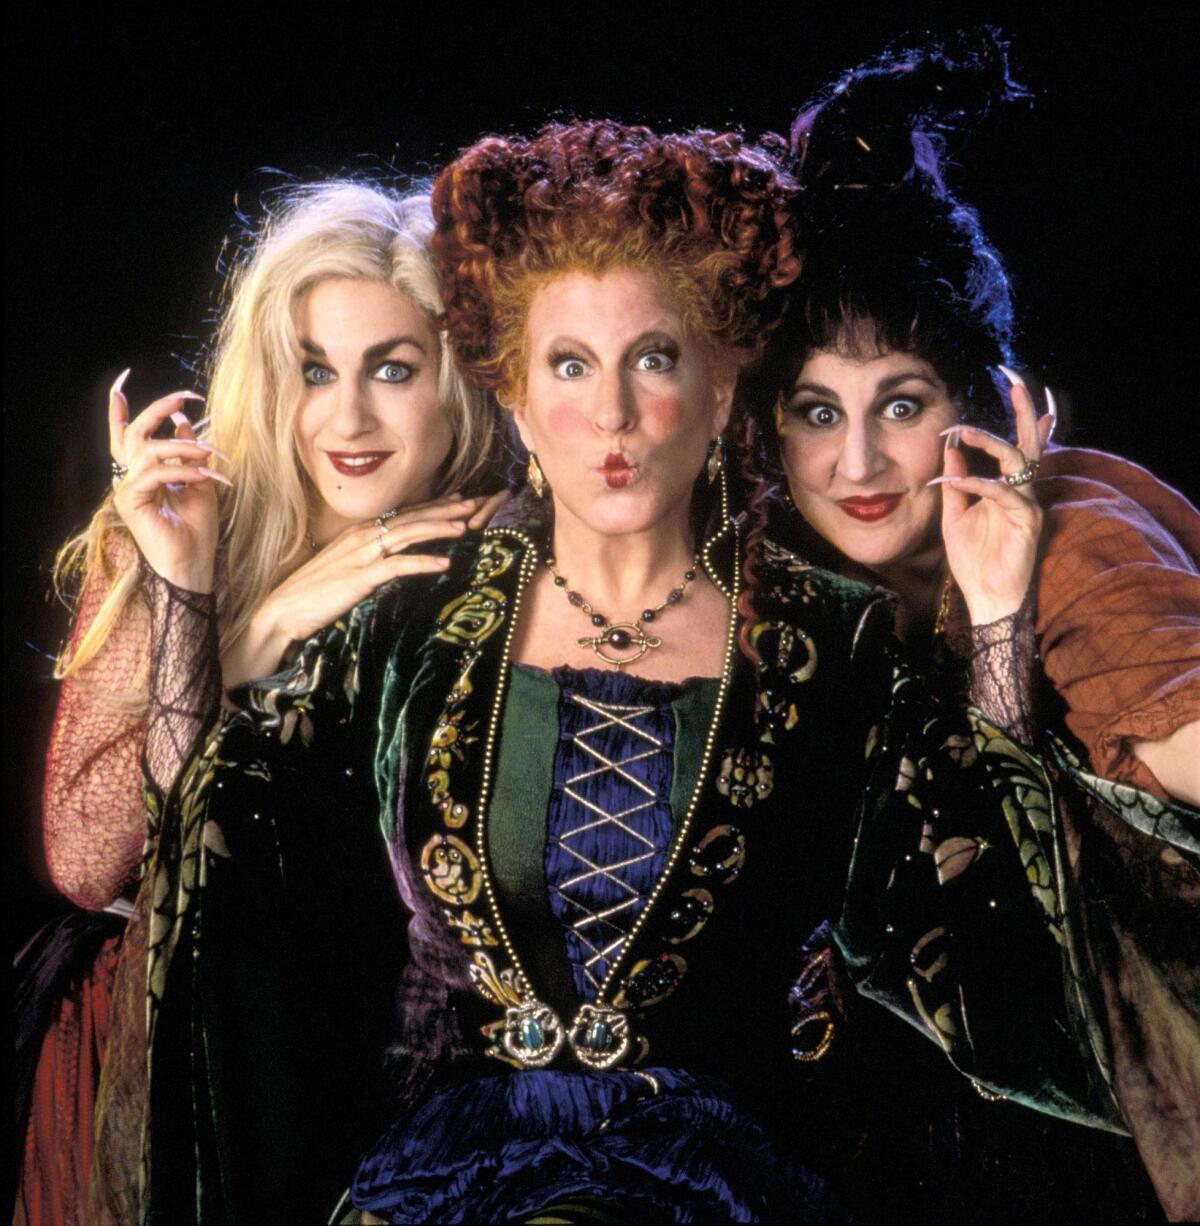 Three women in colorful witch costumes